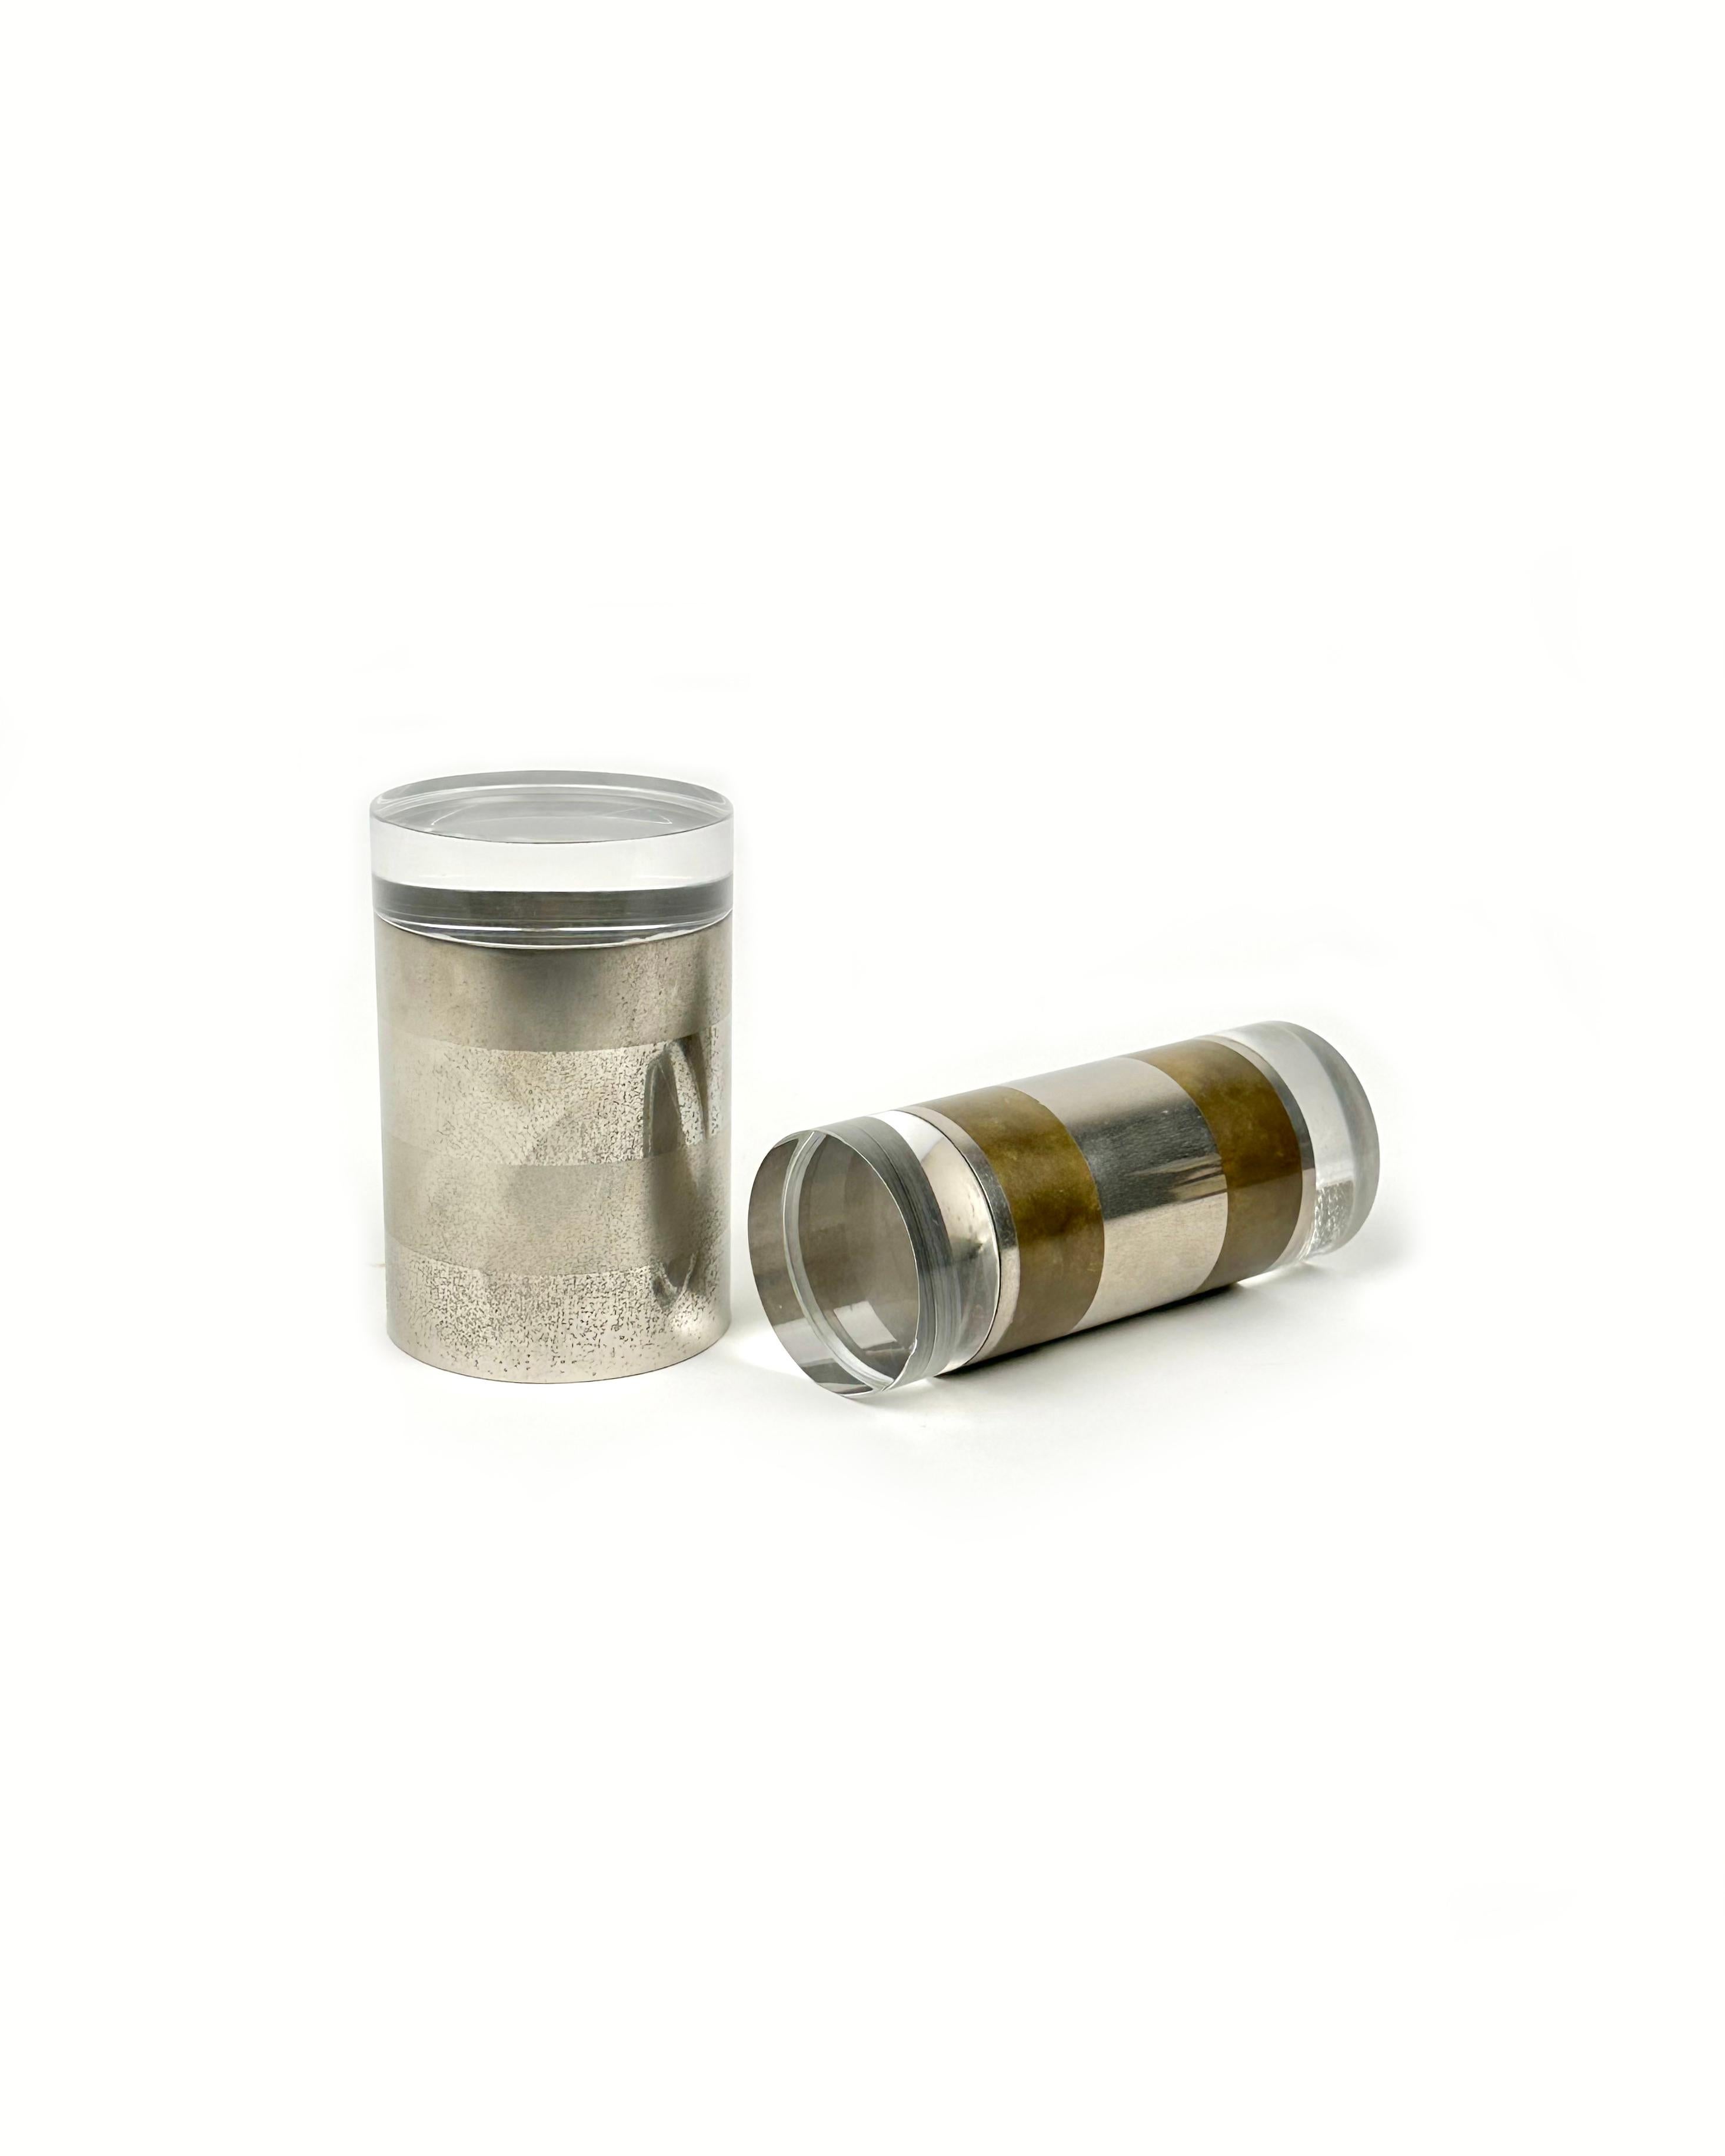 Pair of Cylindrical Box in Chrome, Brass and Lucite by Romeo Rega, Italy 1970s For Sale 1